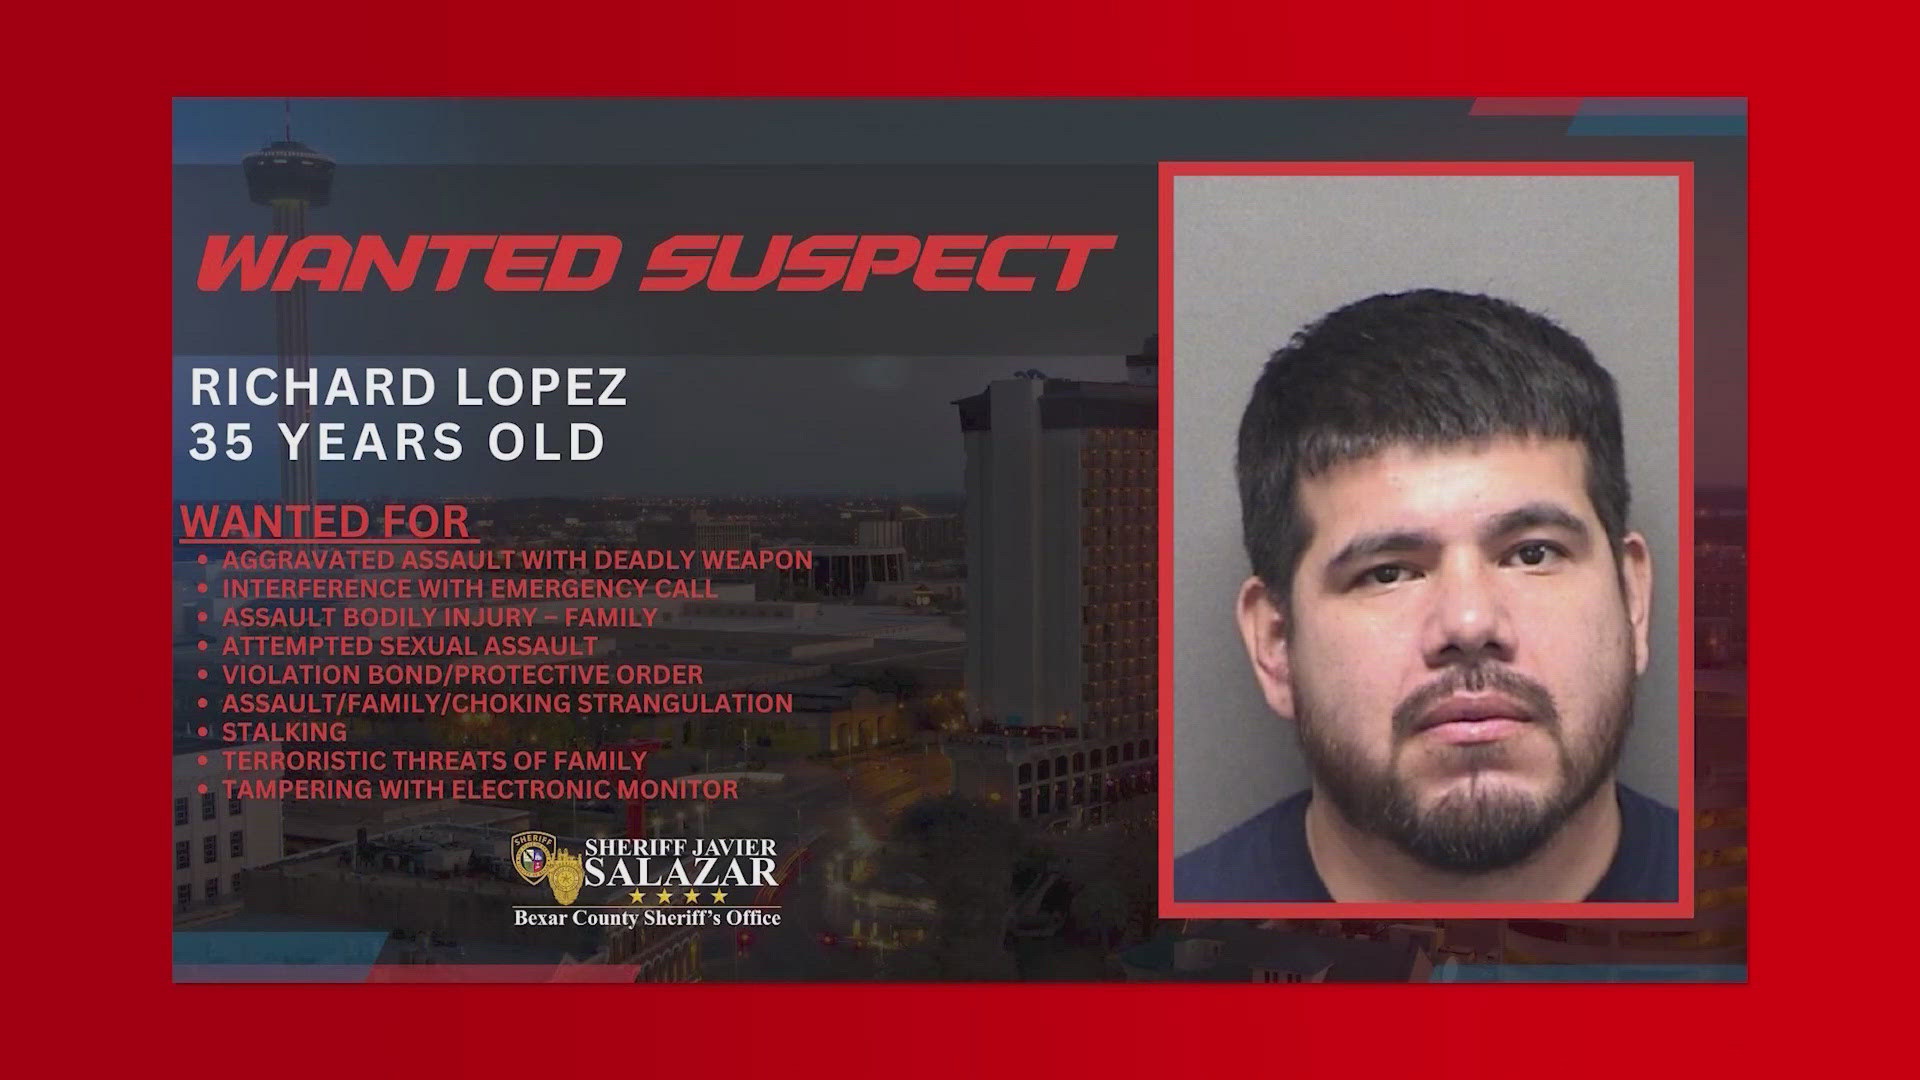 Officials say the suspect has a criminal record dating back to 2013.